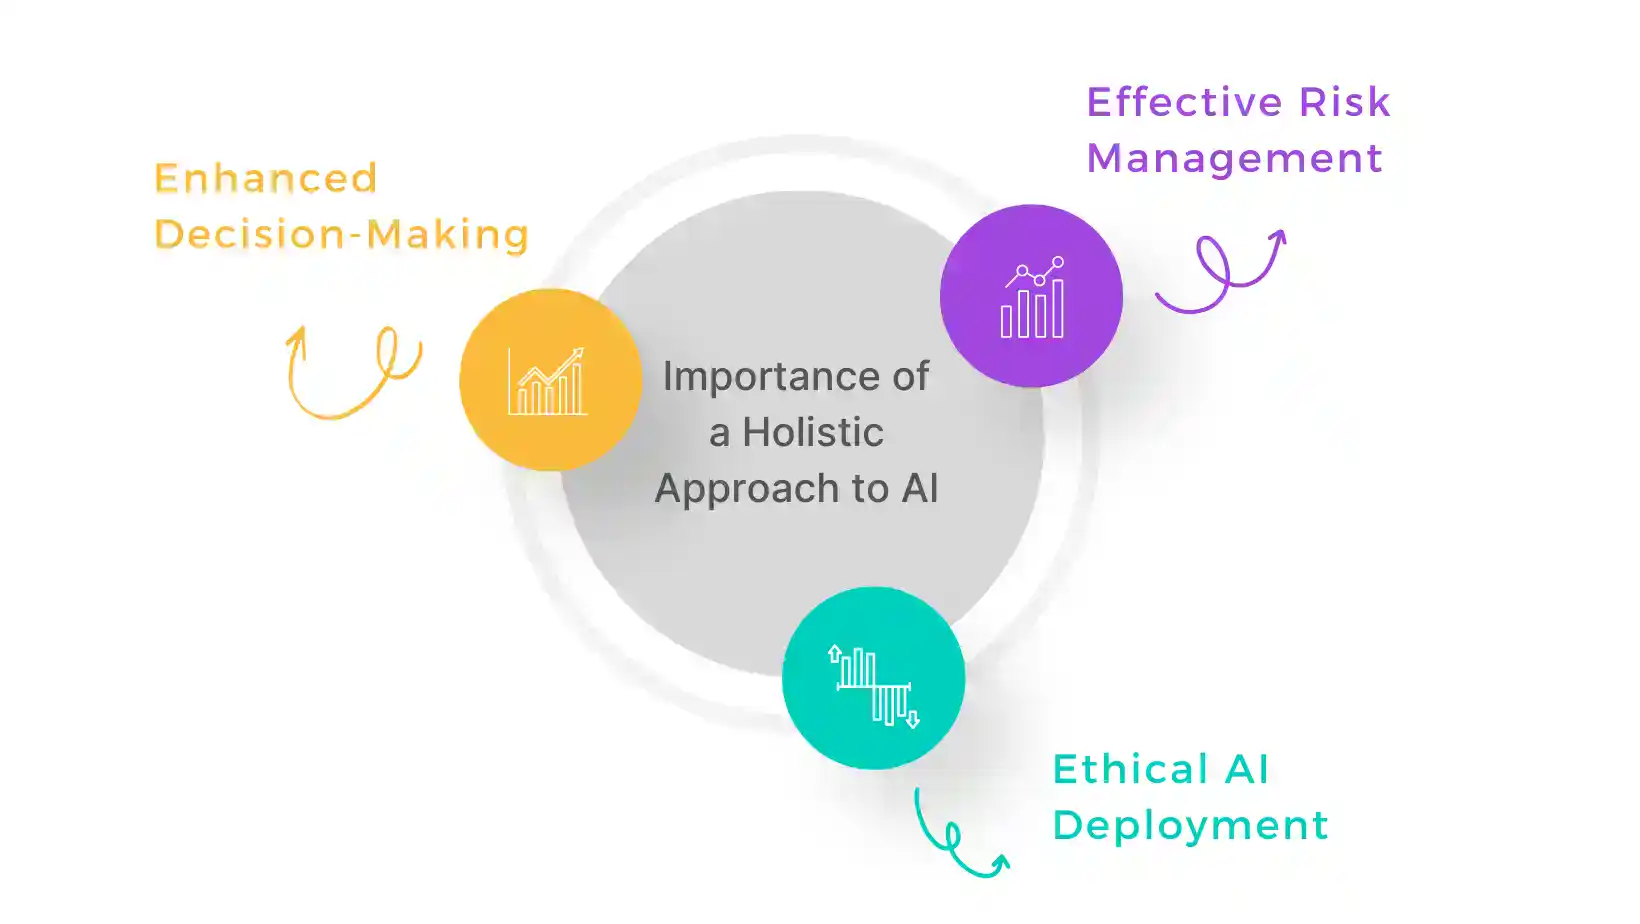 Importance of a Holistic Approach to AI